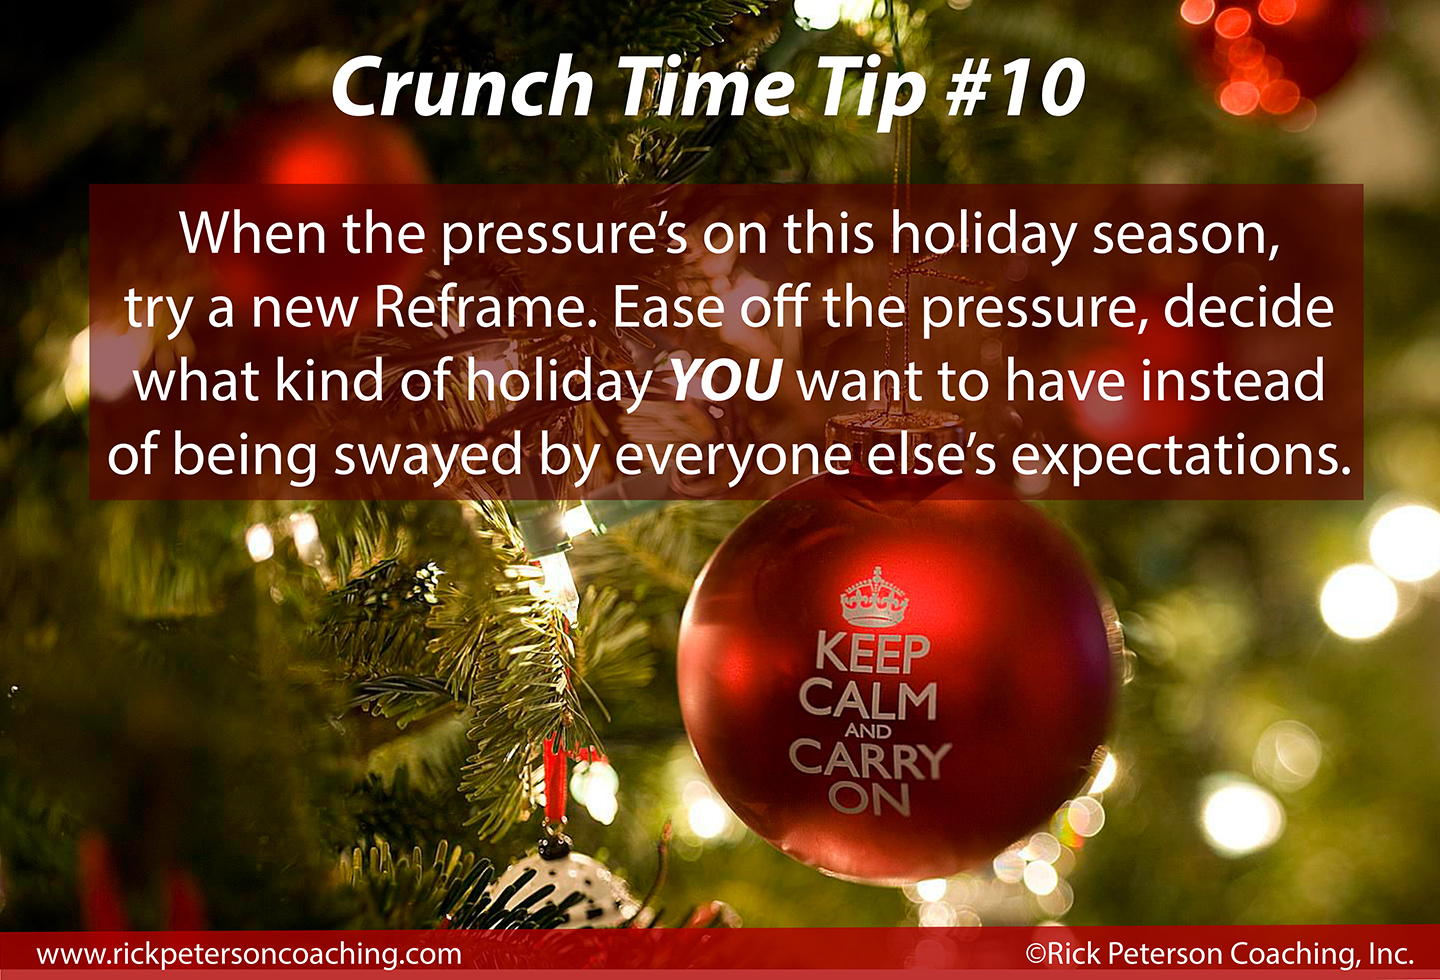 Crunch-Time-Tip-10small